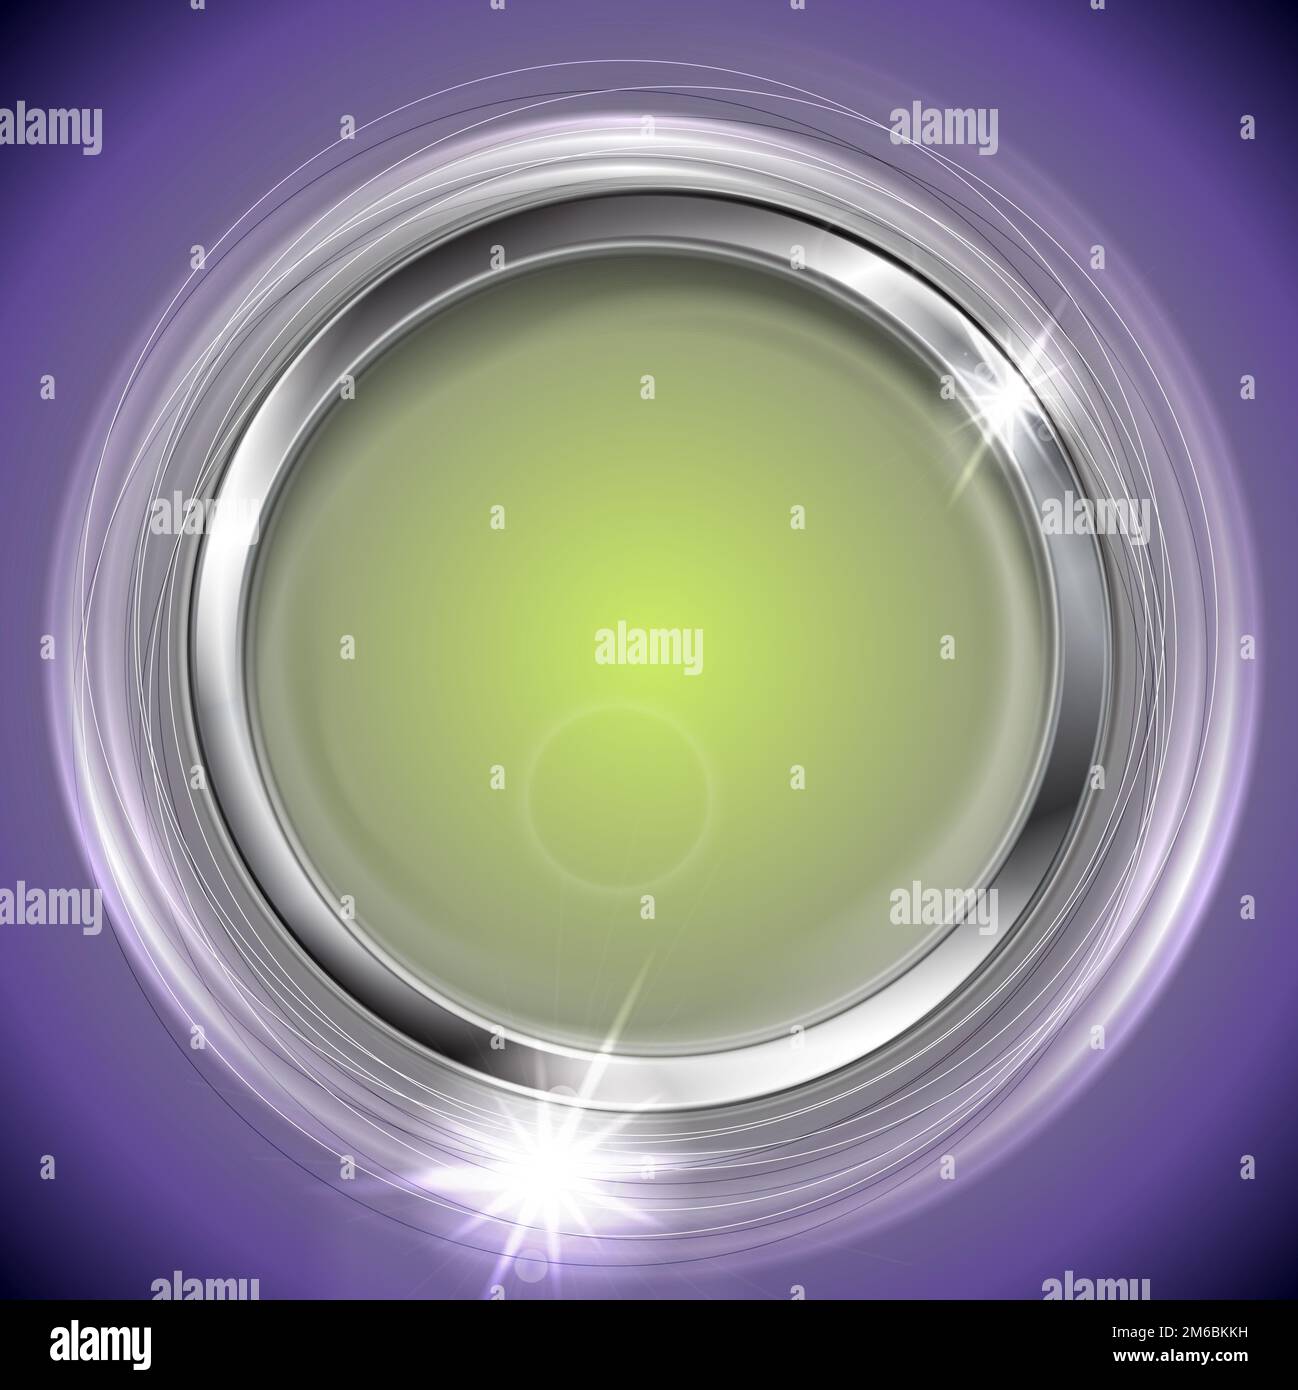 Bright shiny background with metal circle frame Stock Photo